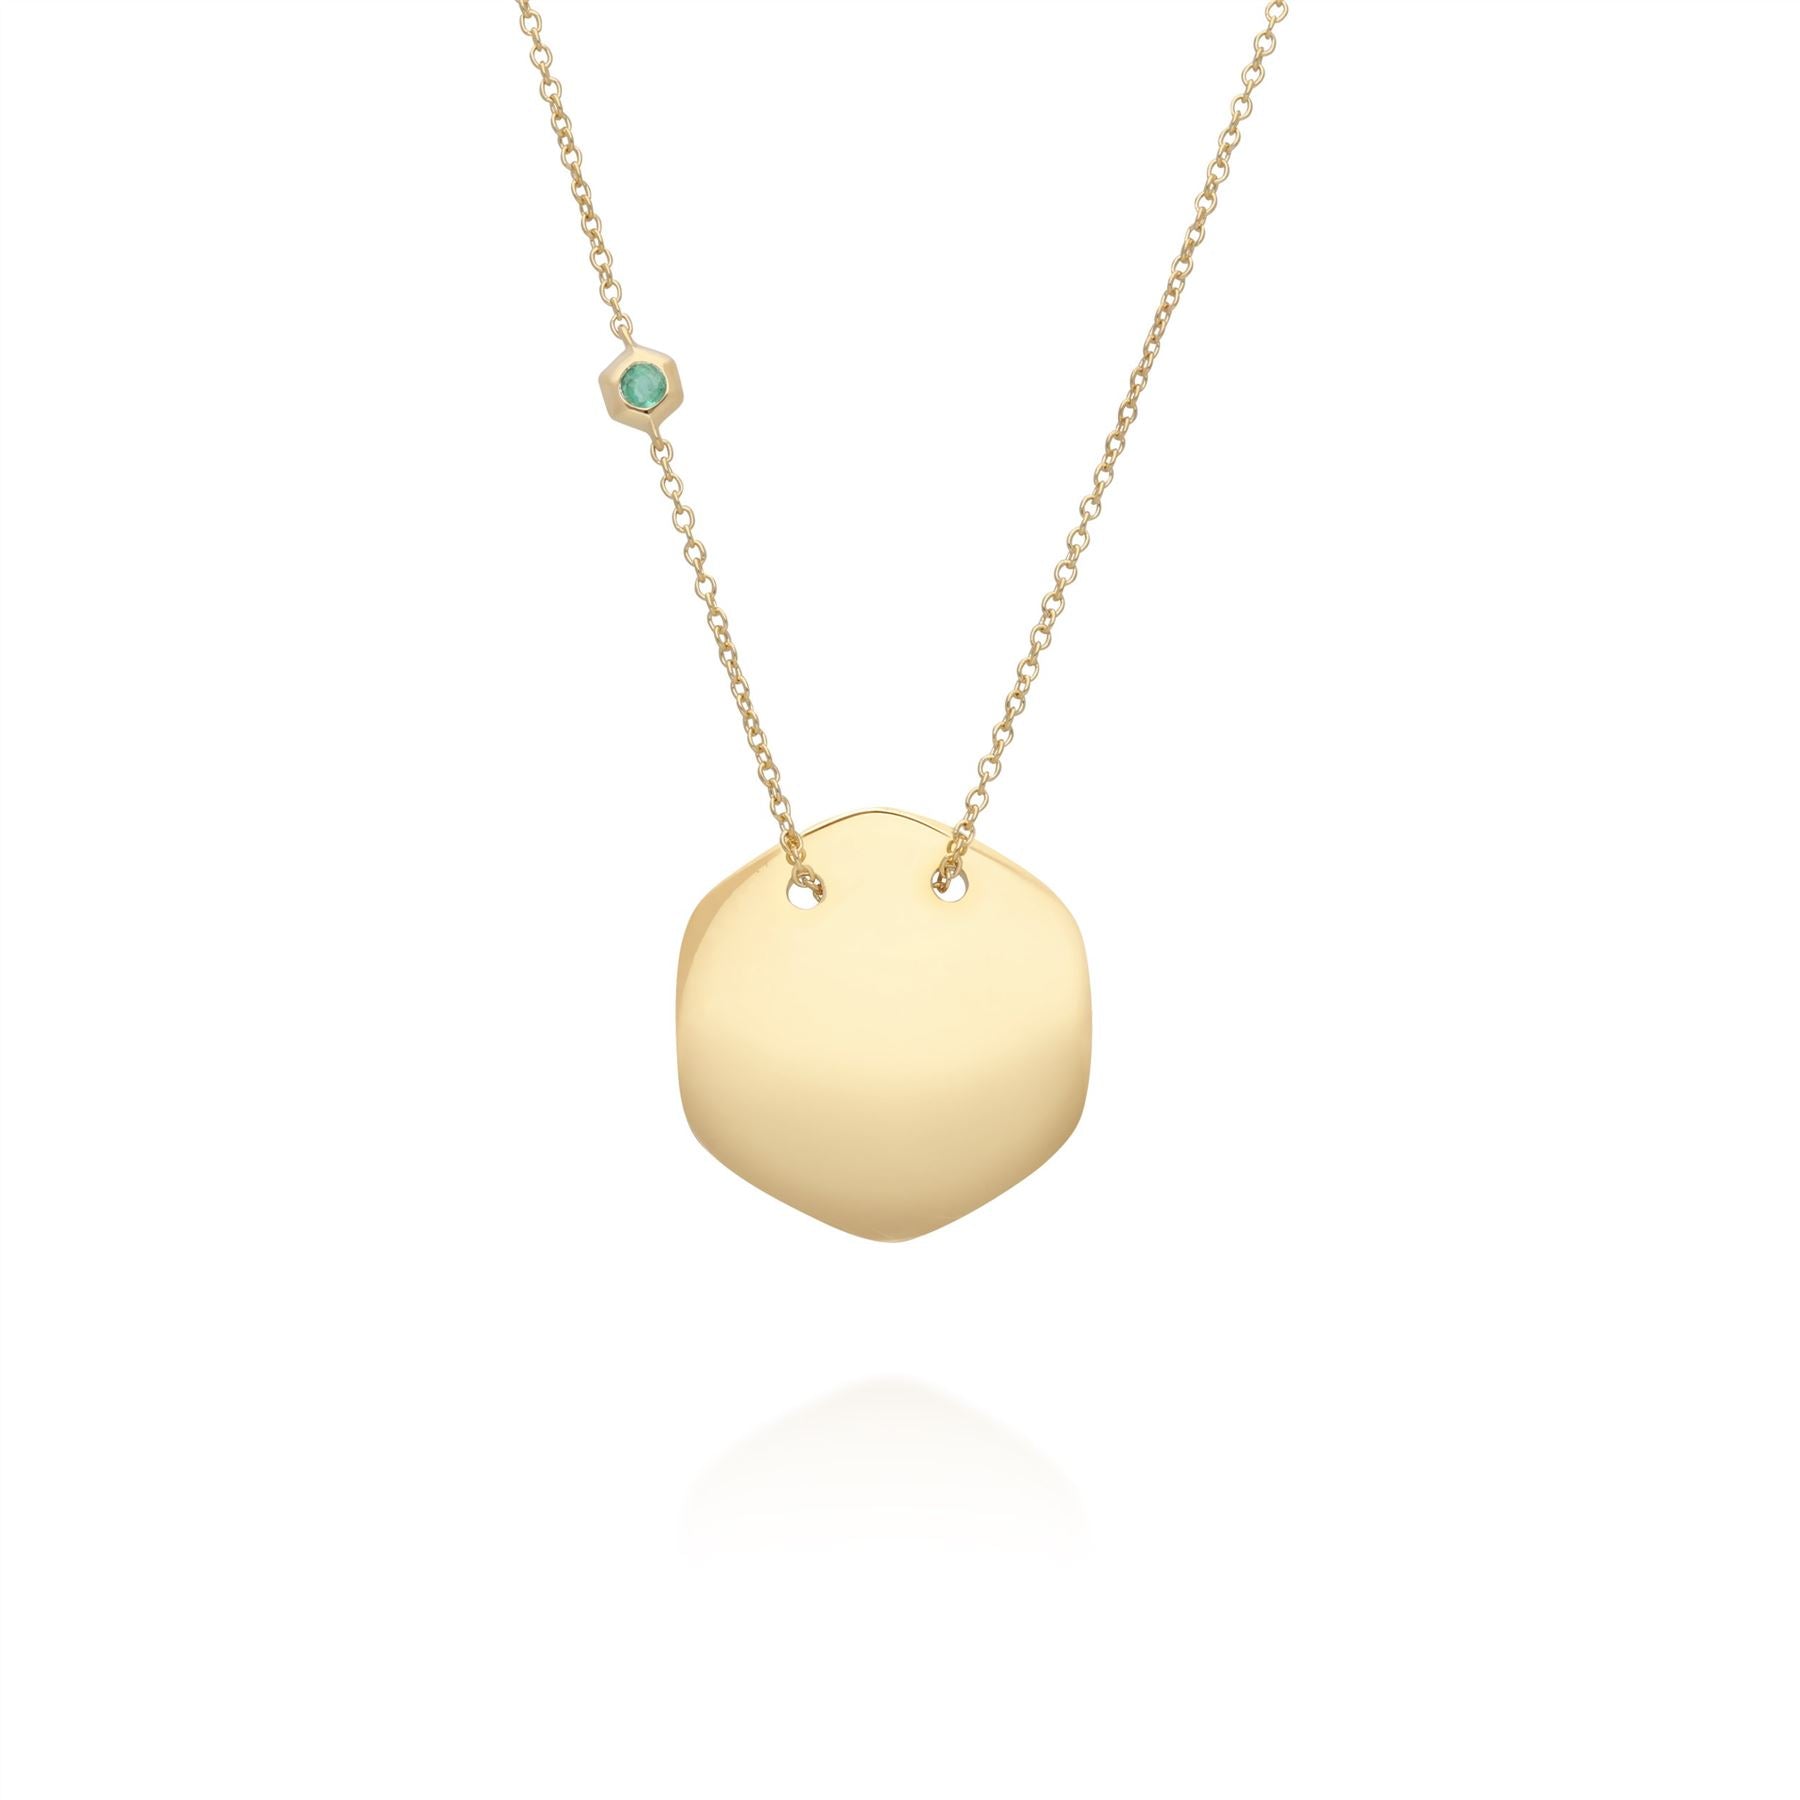 Emerald Engravable Necklace in Yellow Gold Plated Sterling Silver